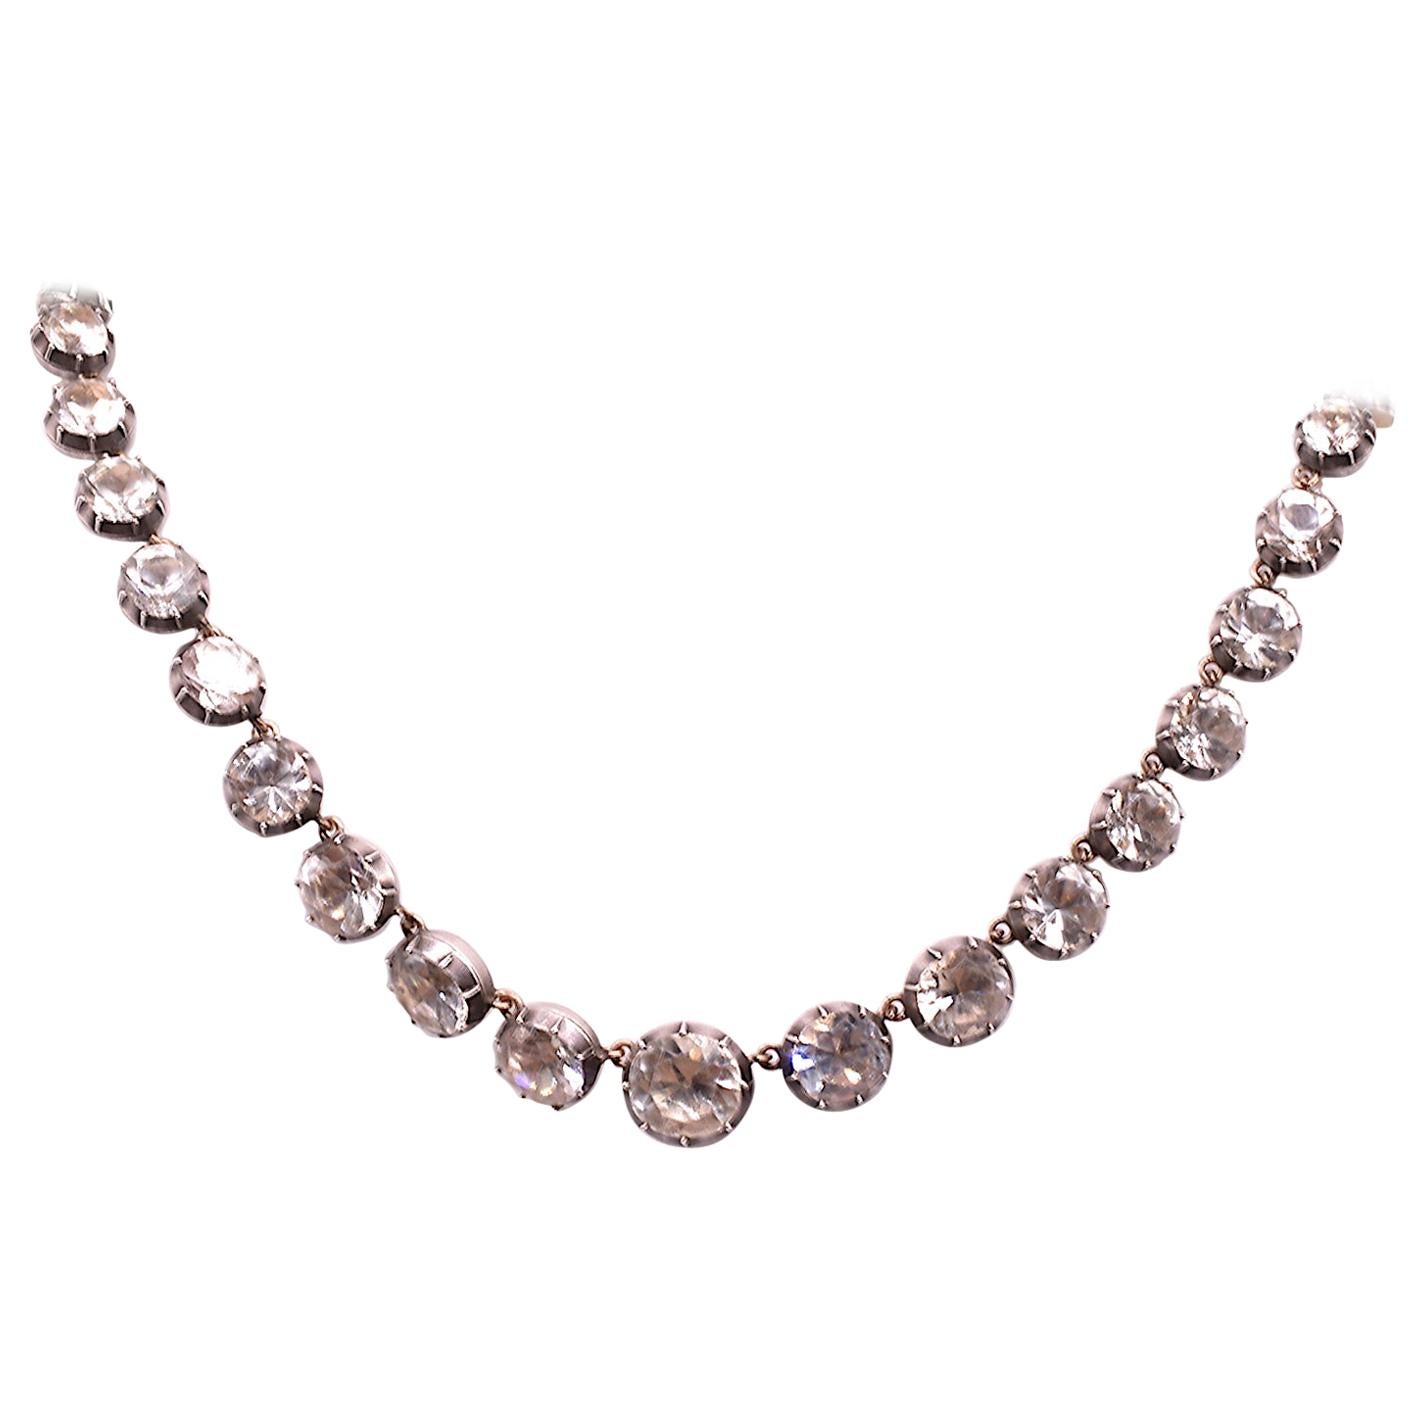 Georgian Paste and Silver Riviere Necklace, 16.5"